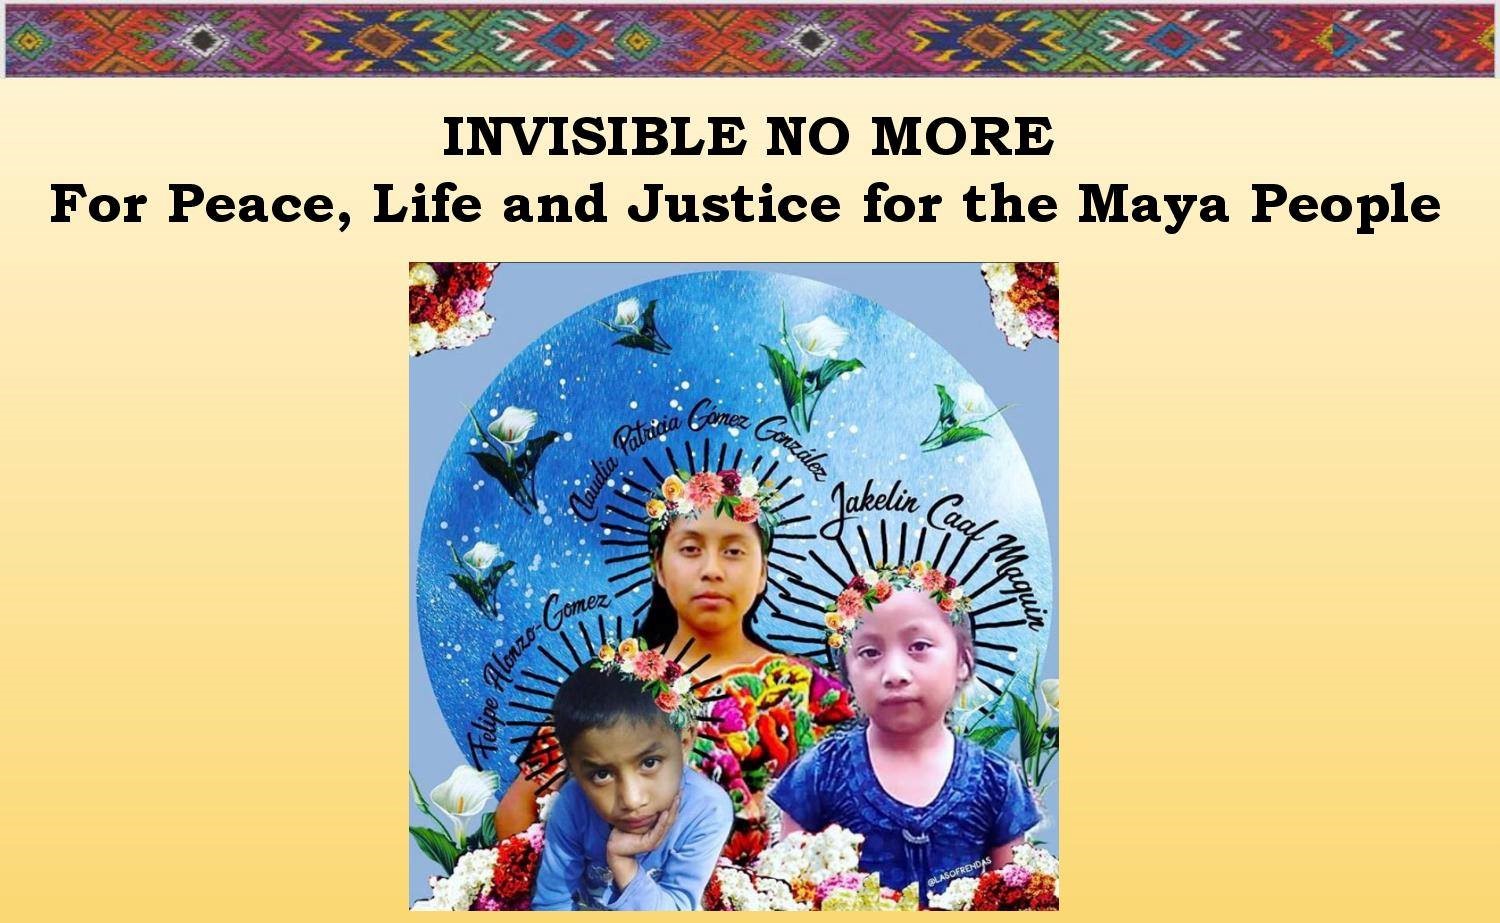 Graphic with yellow background and symbols across top. Photo of three children with flowers surrounding them and blue background. Names above the children's heads: Felipe Alonzo-Gomez, Claudia Patricia Gomez Gonzalz, Jakelin Caal Maquin